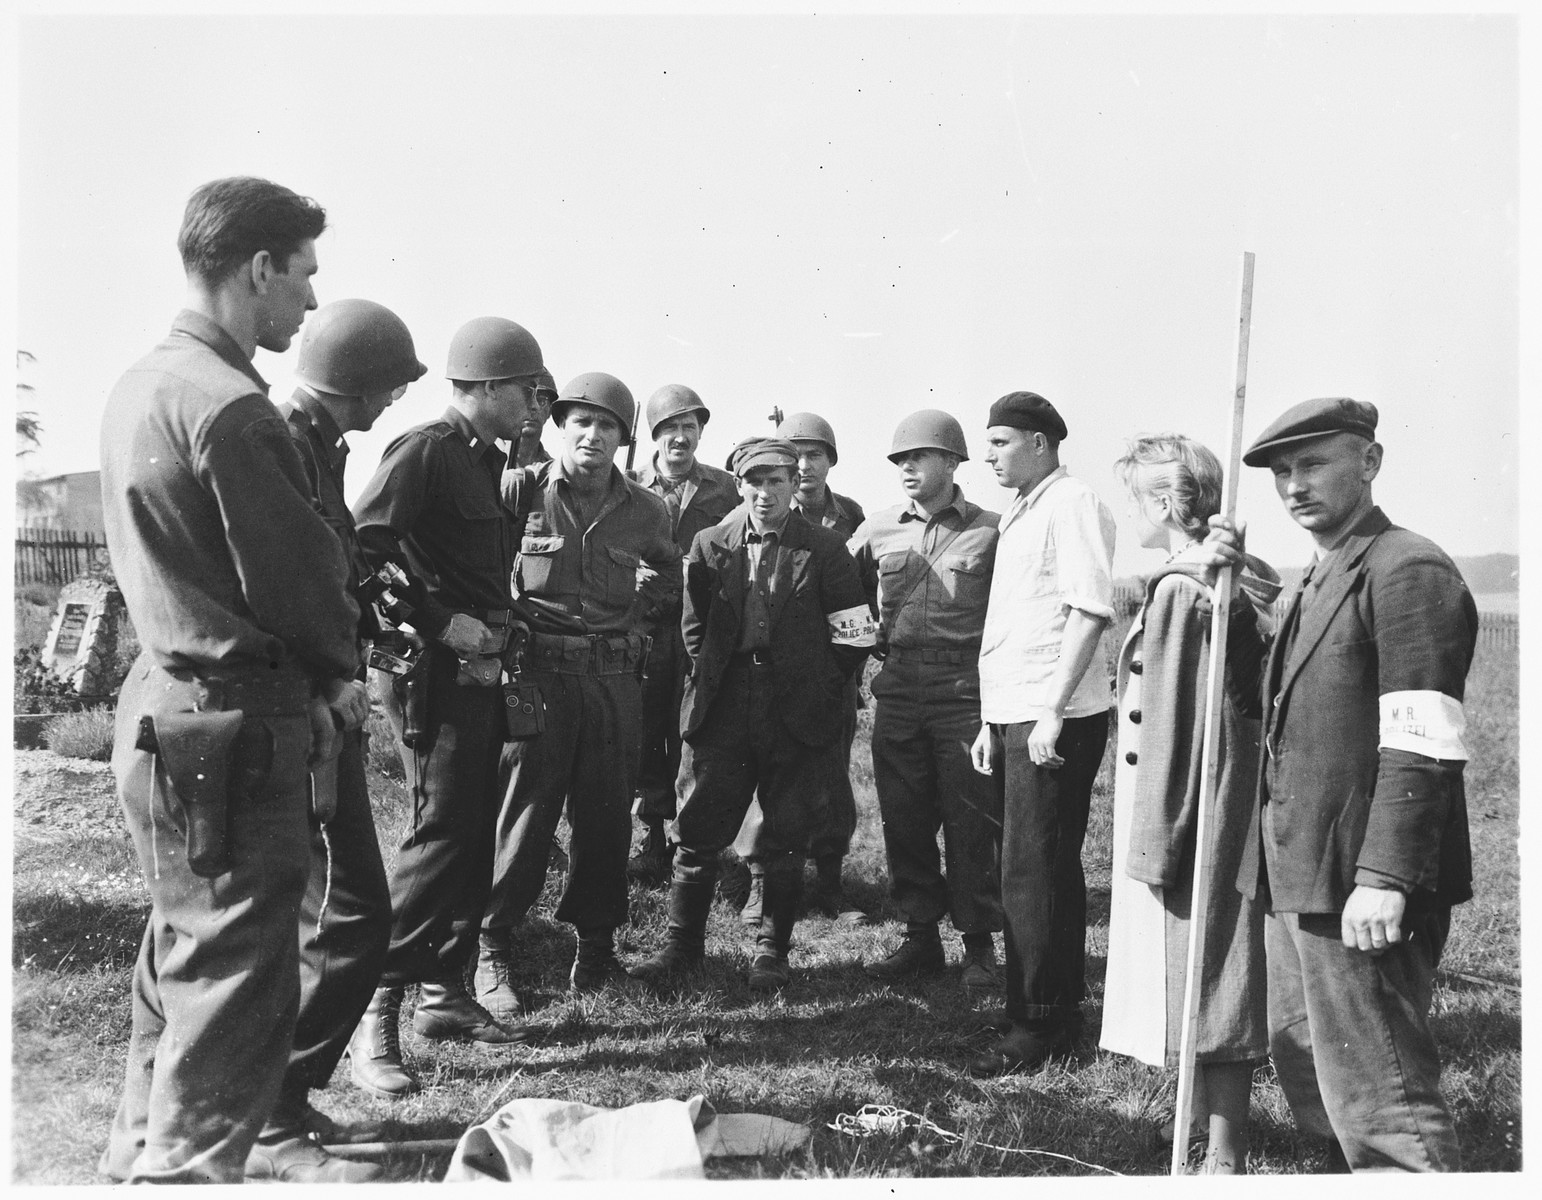 American military authorities question a German civilian from Estedt (pictured third from right) about the atrocity that occurred near the town.